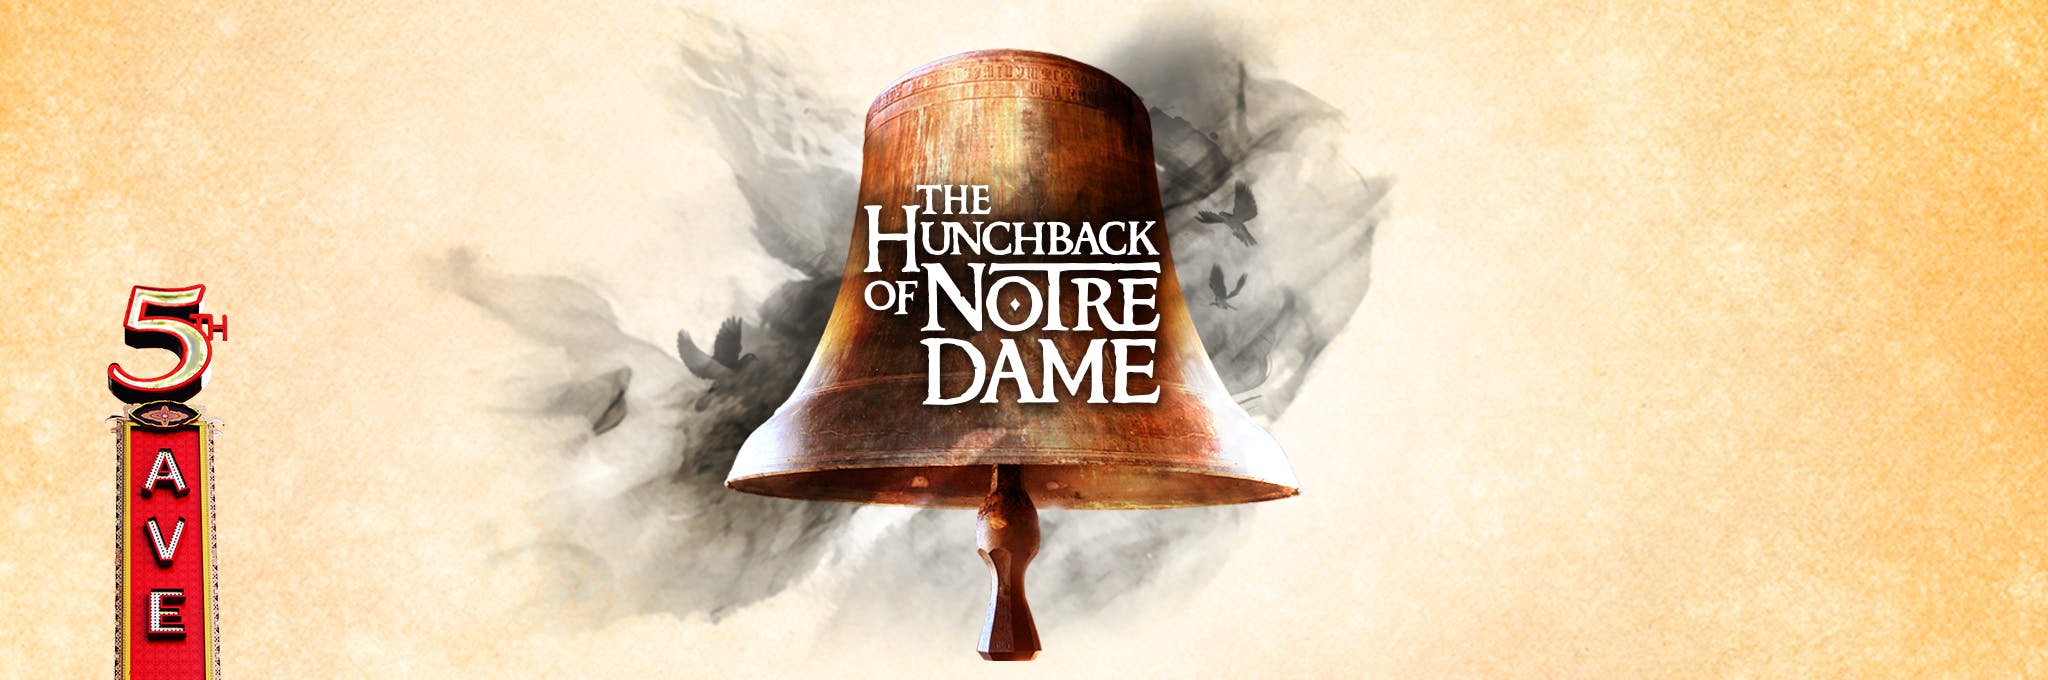 The Hunchback of Notre Dame Tickets | Seattle | TodayTix